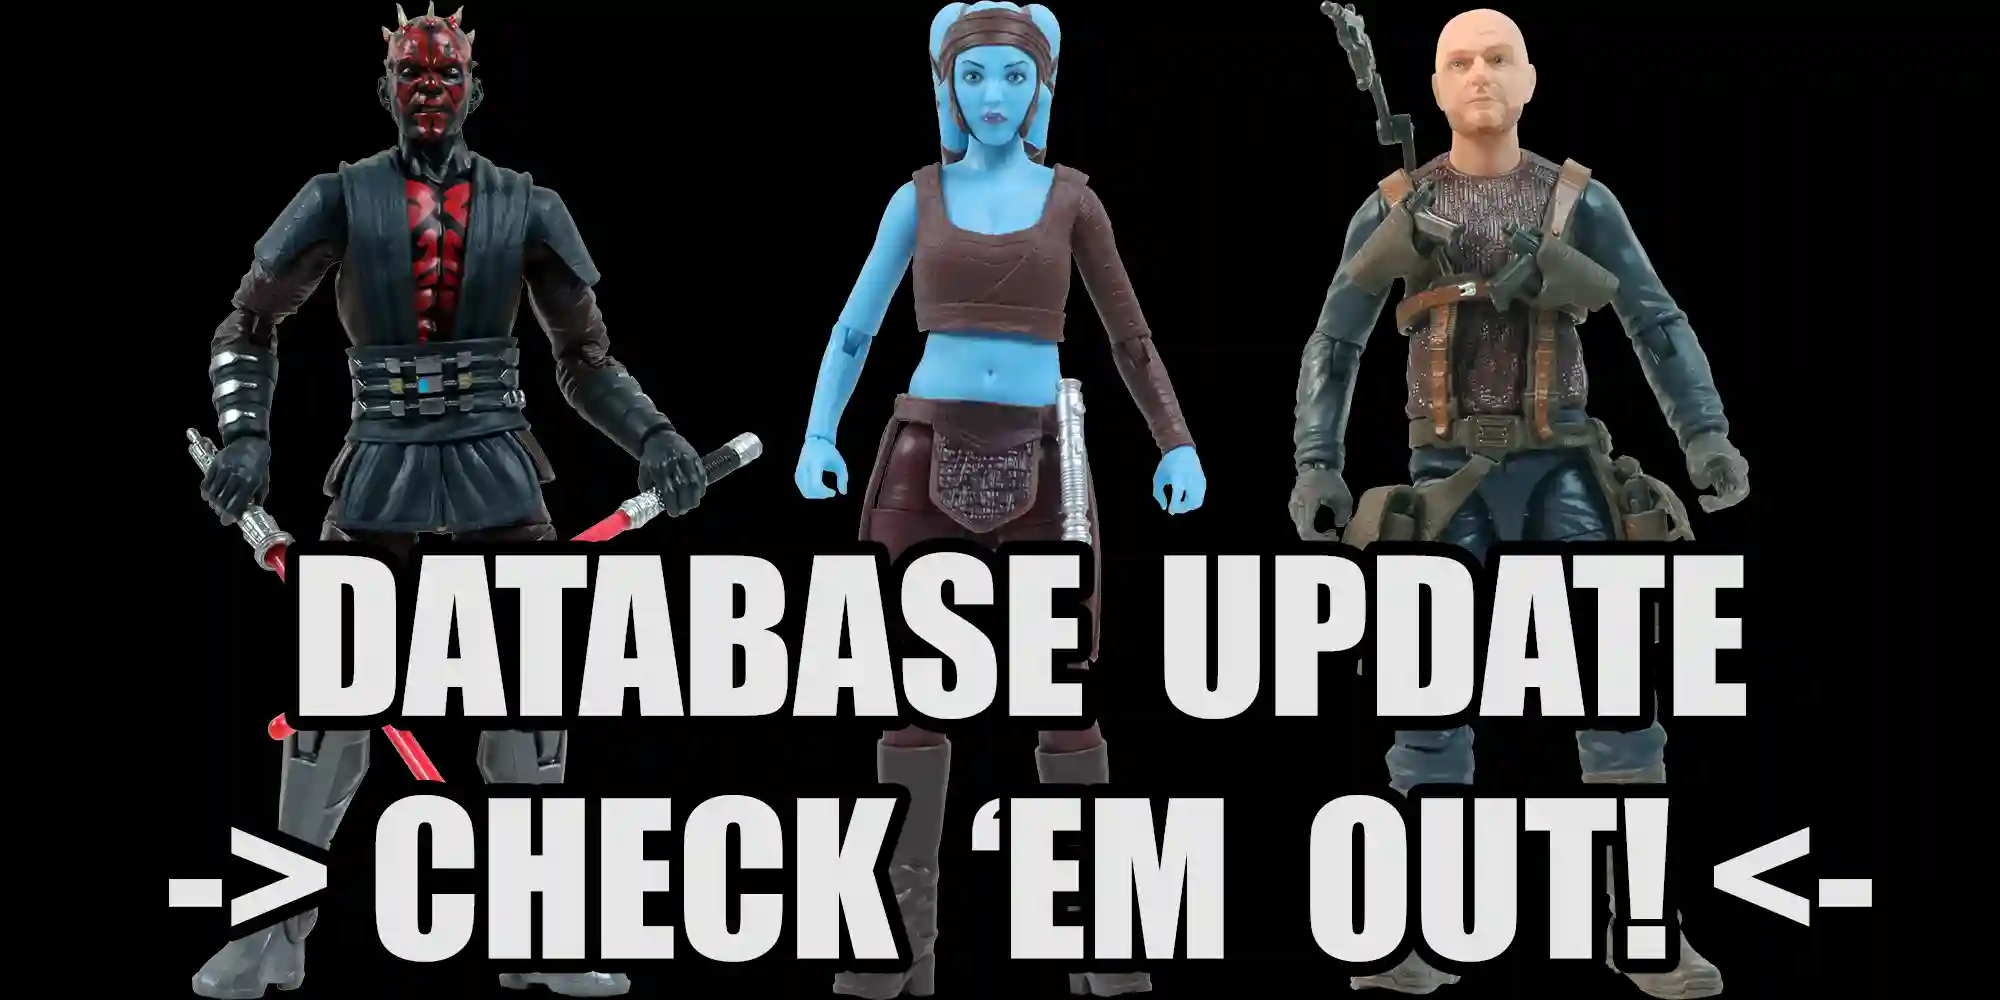 New Black Series Figures Archived - Check Them Out!